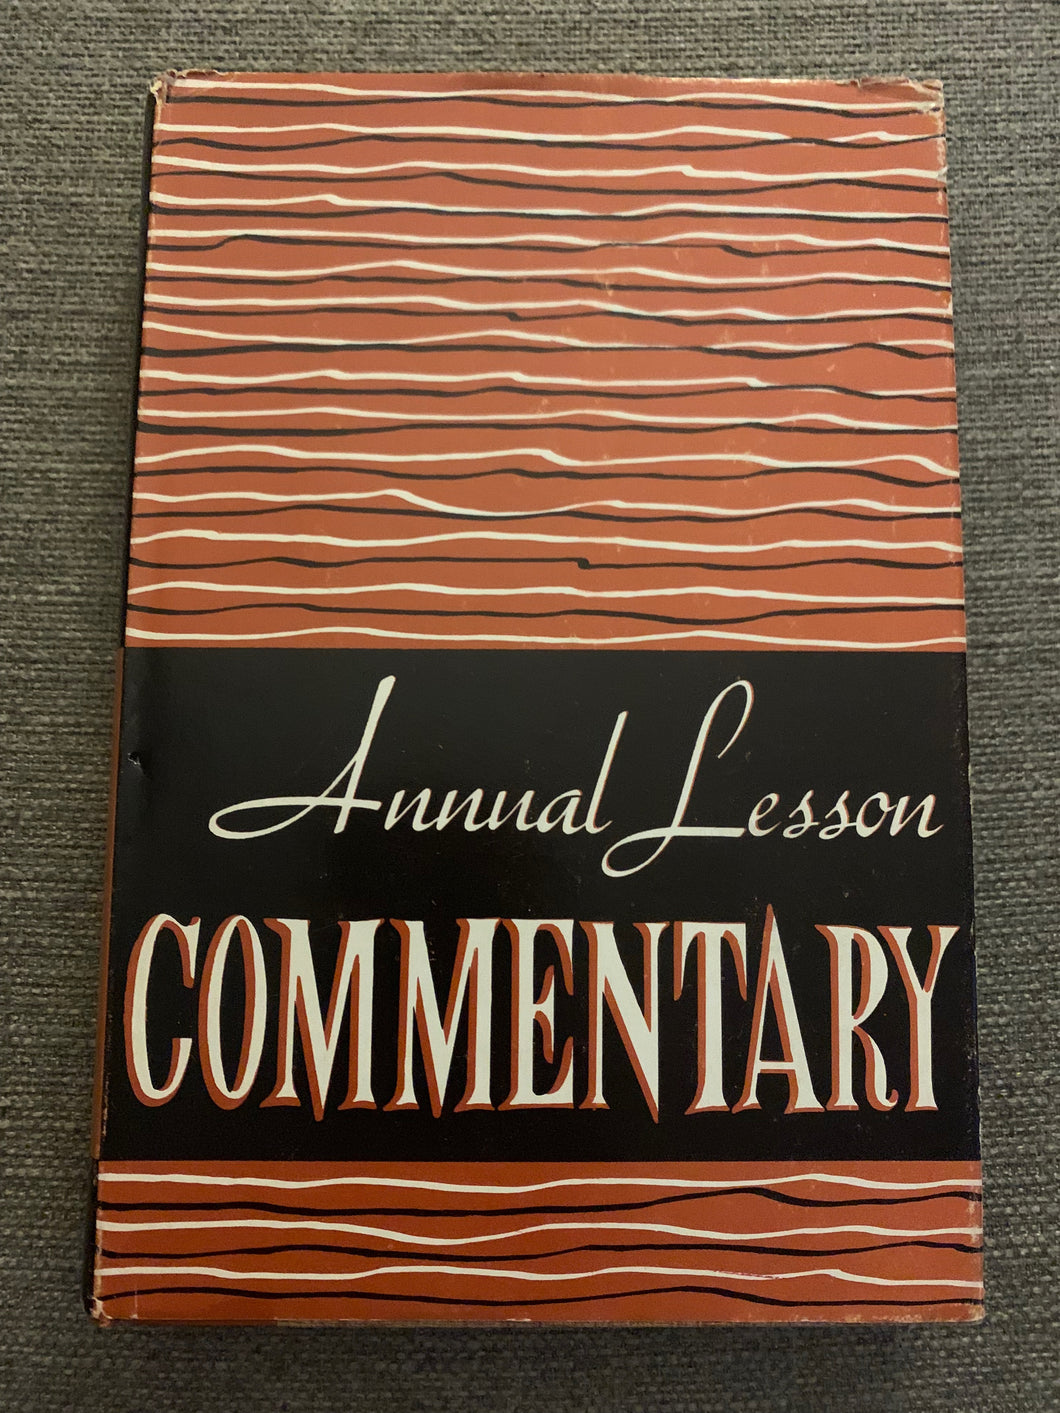 Annual Lesson Commentary by Ralph W. Harris